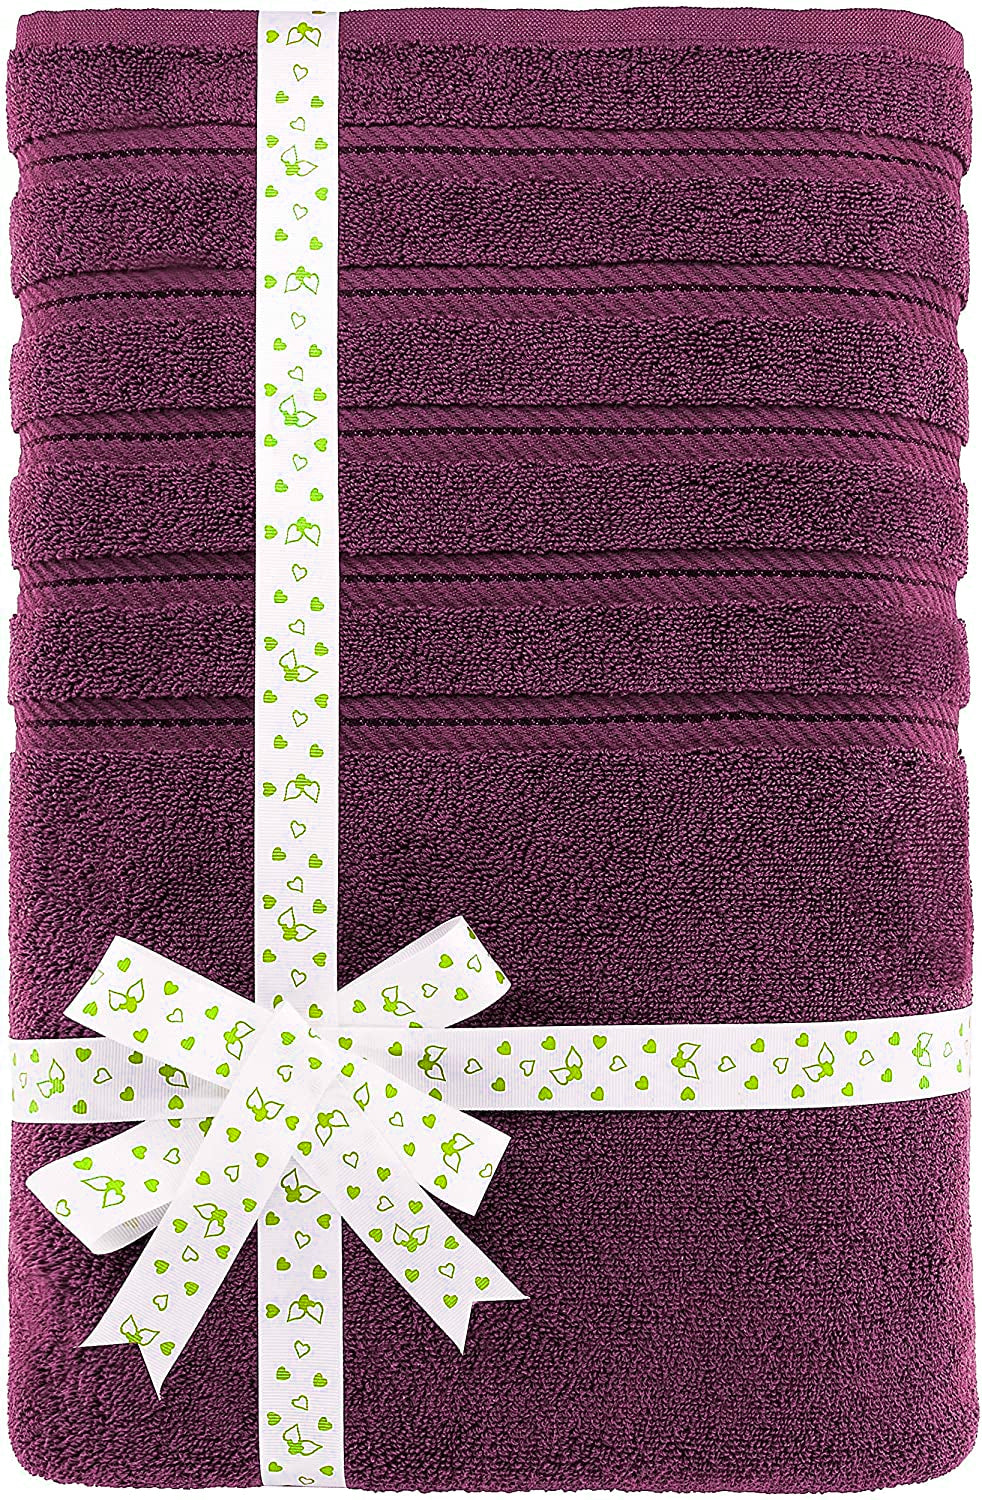 Plush XL Natural Egyptian Cotton Super Bath Sheet Towels with a 600 GSM count